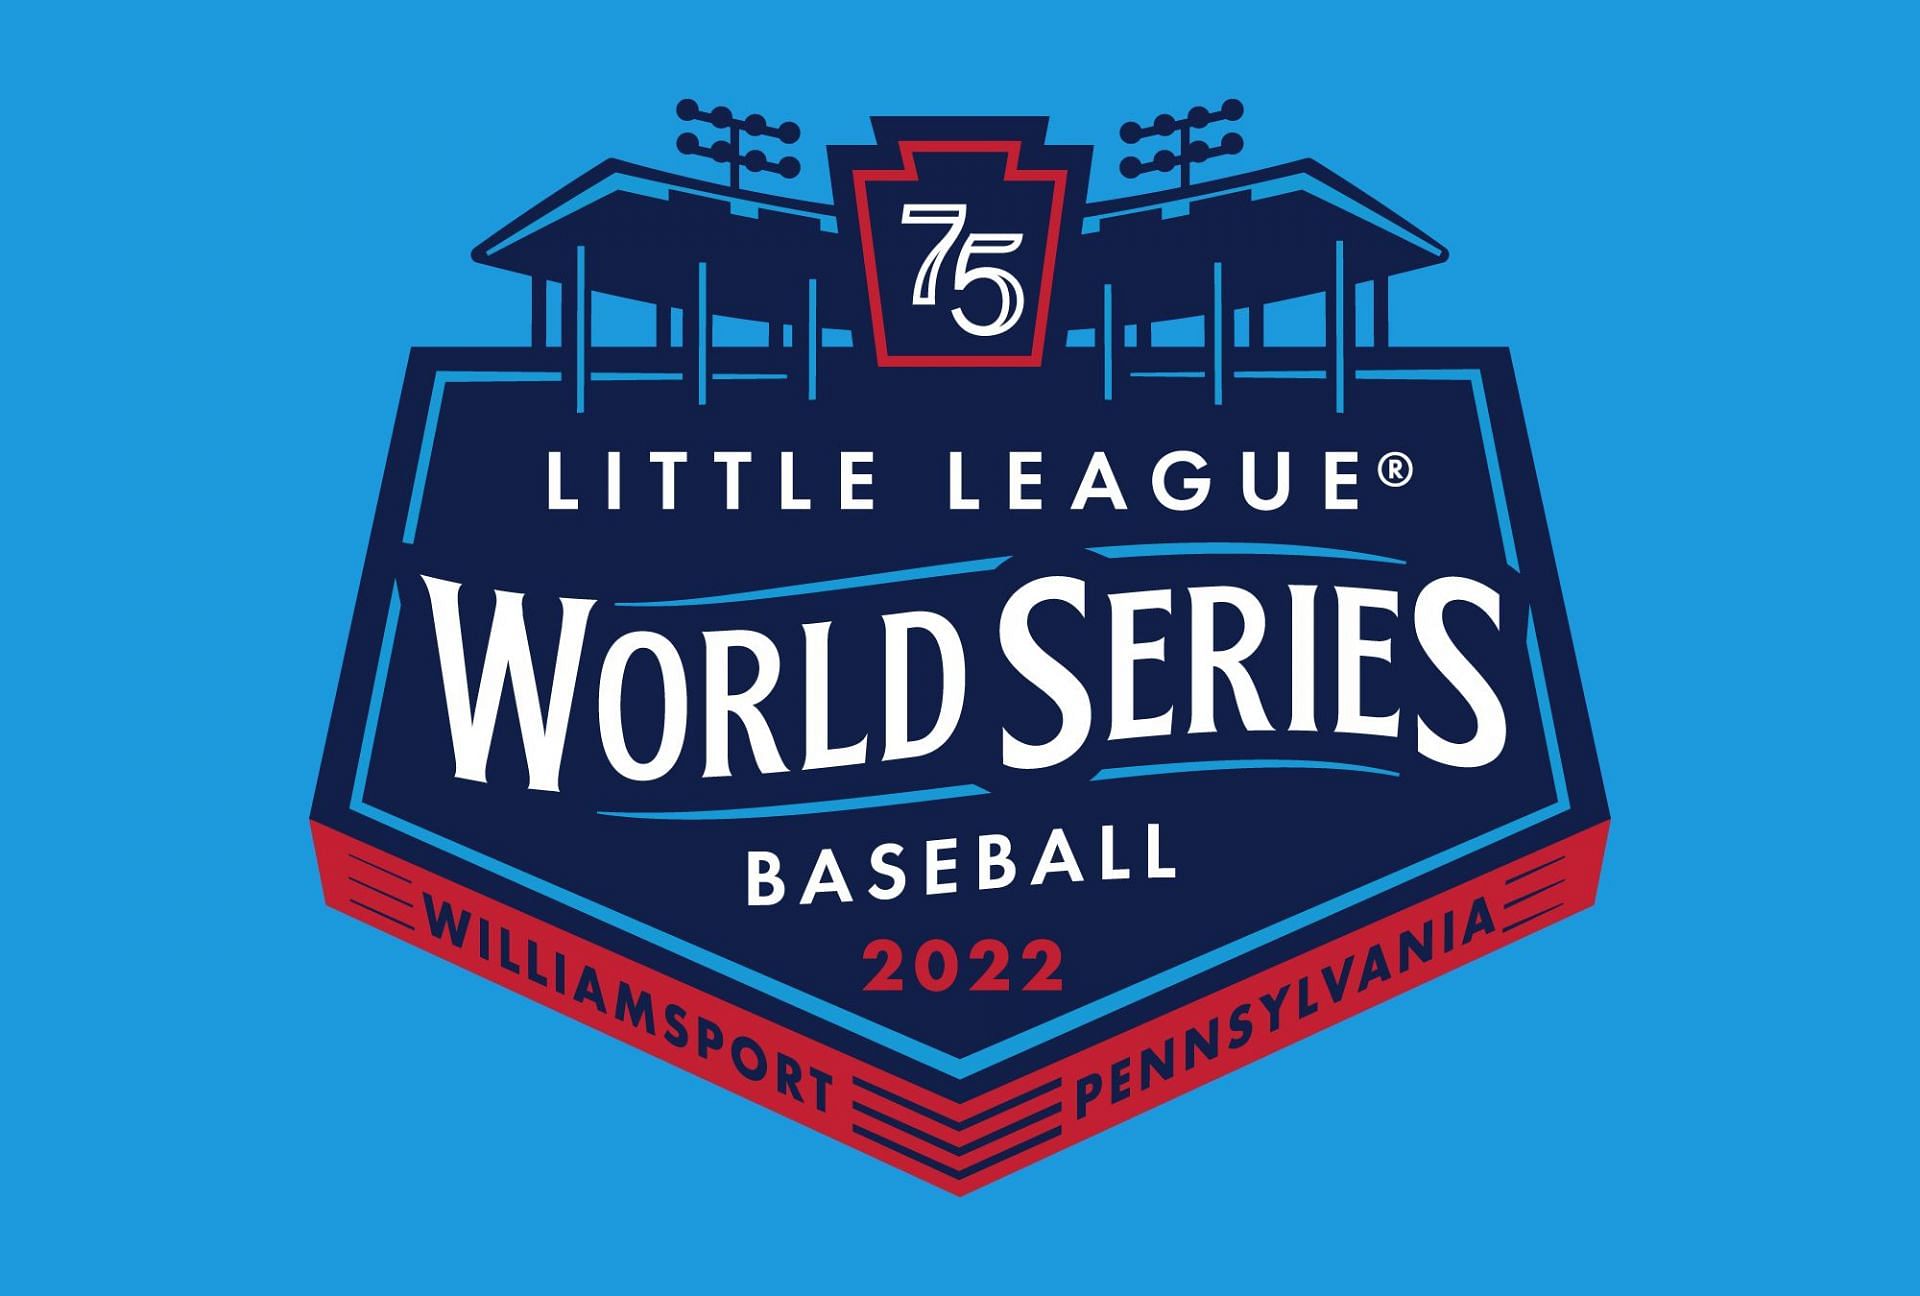 The 2022 LLWS is now underway in Williamsport, PA